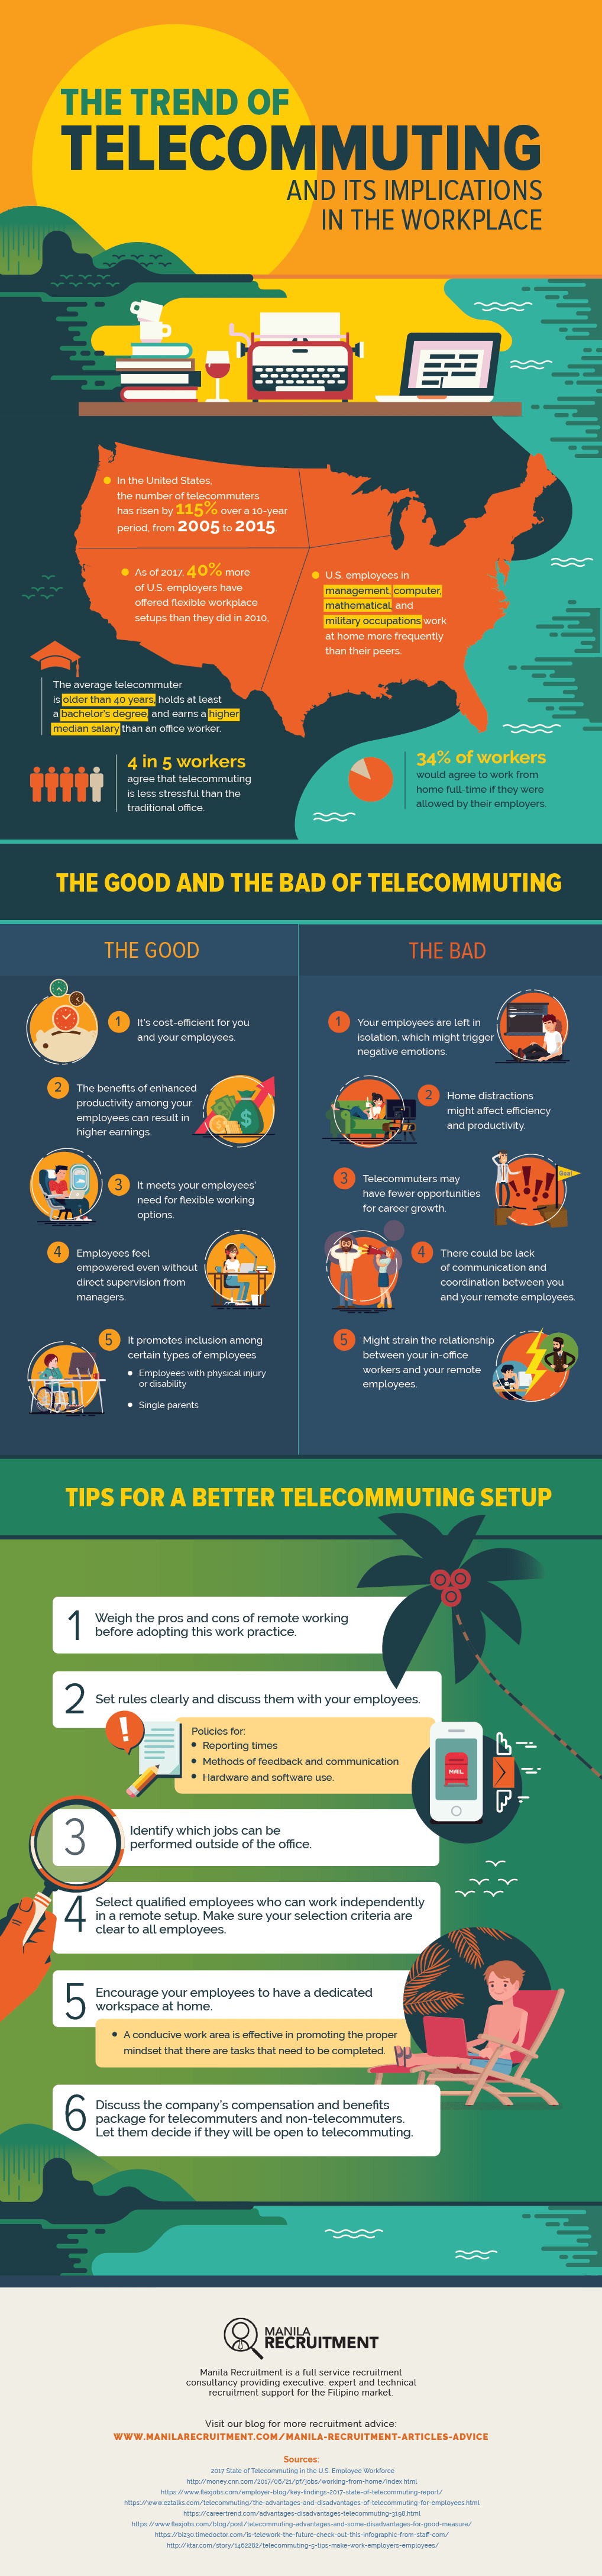 The Trend of Telecommuting and its Implications in the Workplace, manila recruitment, telecommuting infographic, benefits of telecommuting, telecommuting explained